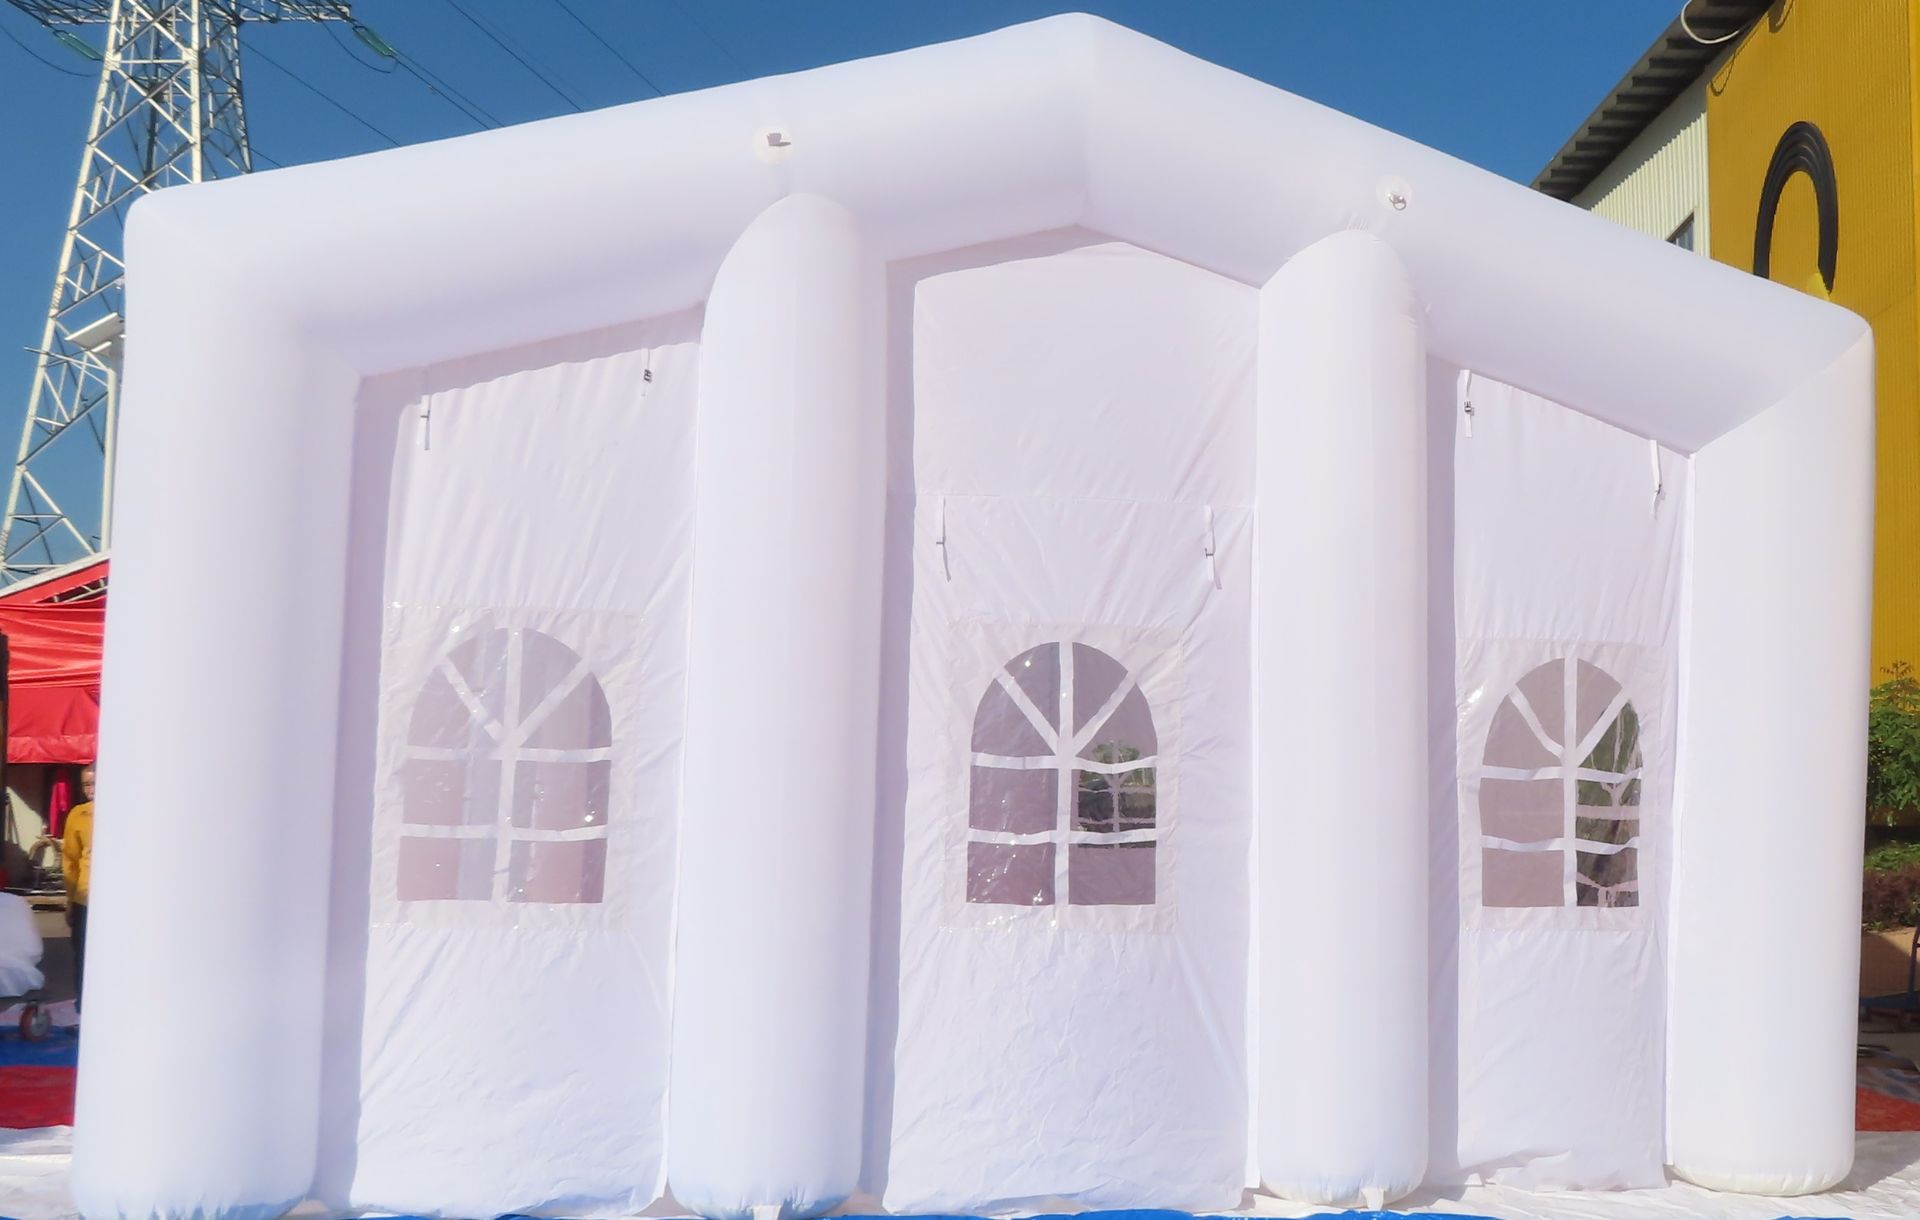 BRAND NEW WHITE INFLATABLE MARQUEE WITH LED LIGHTS, 10 x 6M, 4m TALL, FOR EVENTS WEDDINGS, BIRTHDAYS - Image 7 of 7